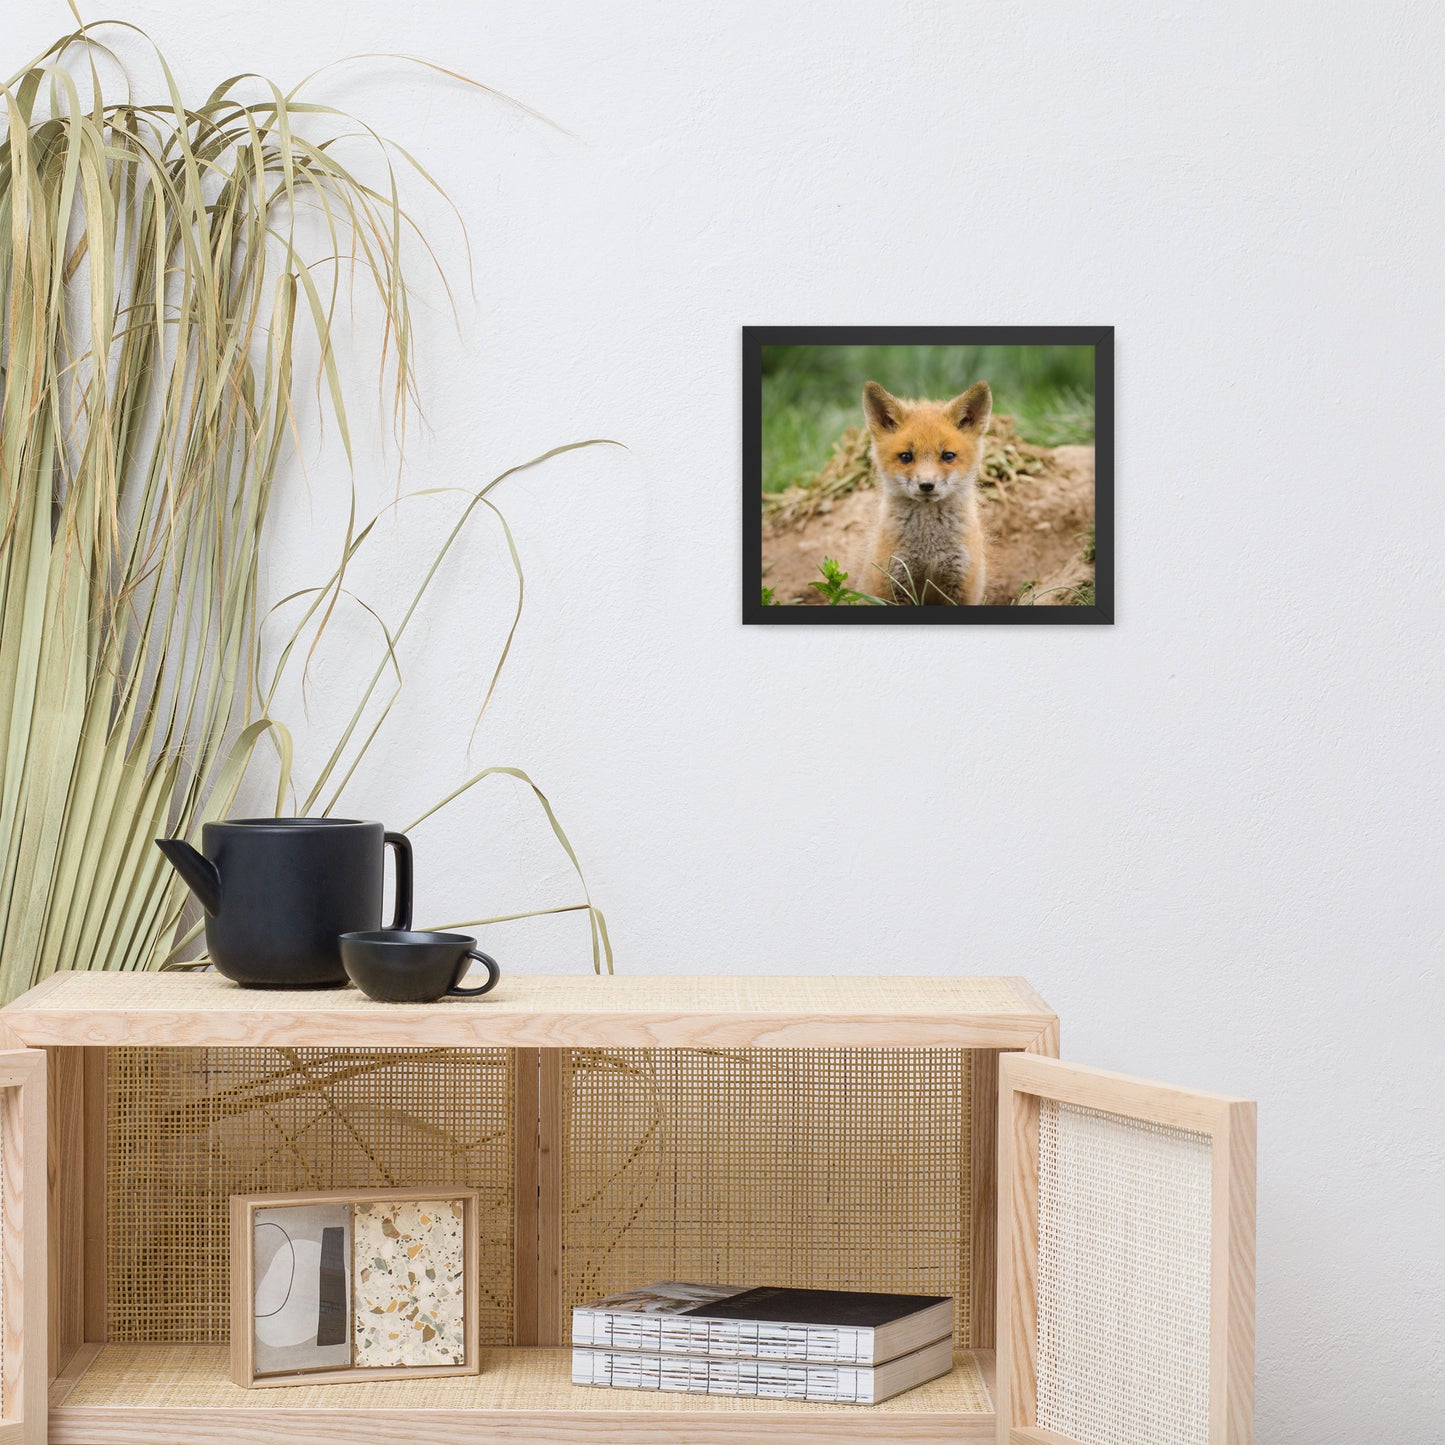 Pictures For Bathroom Wall Decor: Baby Young Red Fox Kit/ Animal / Wildlife / Nature Photographic Artwork - Framed Artwork - Wall Decor